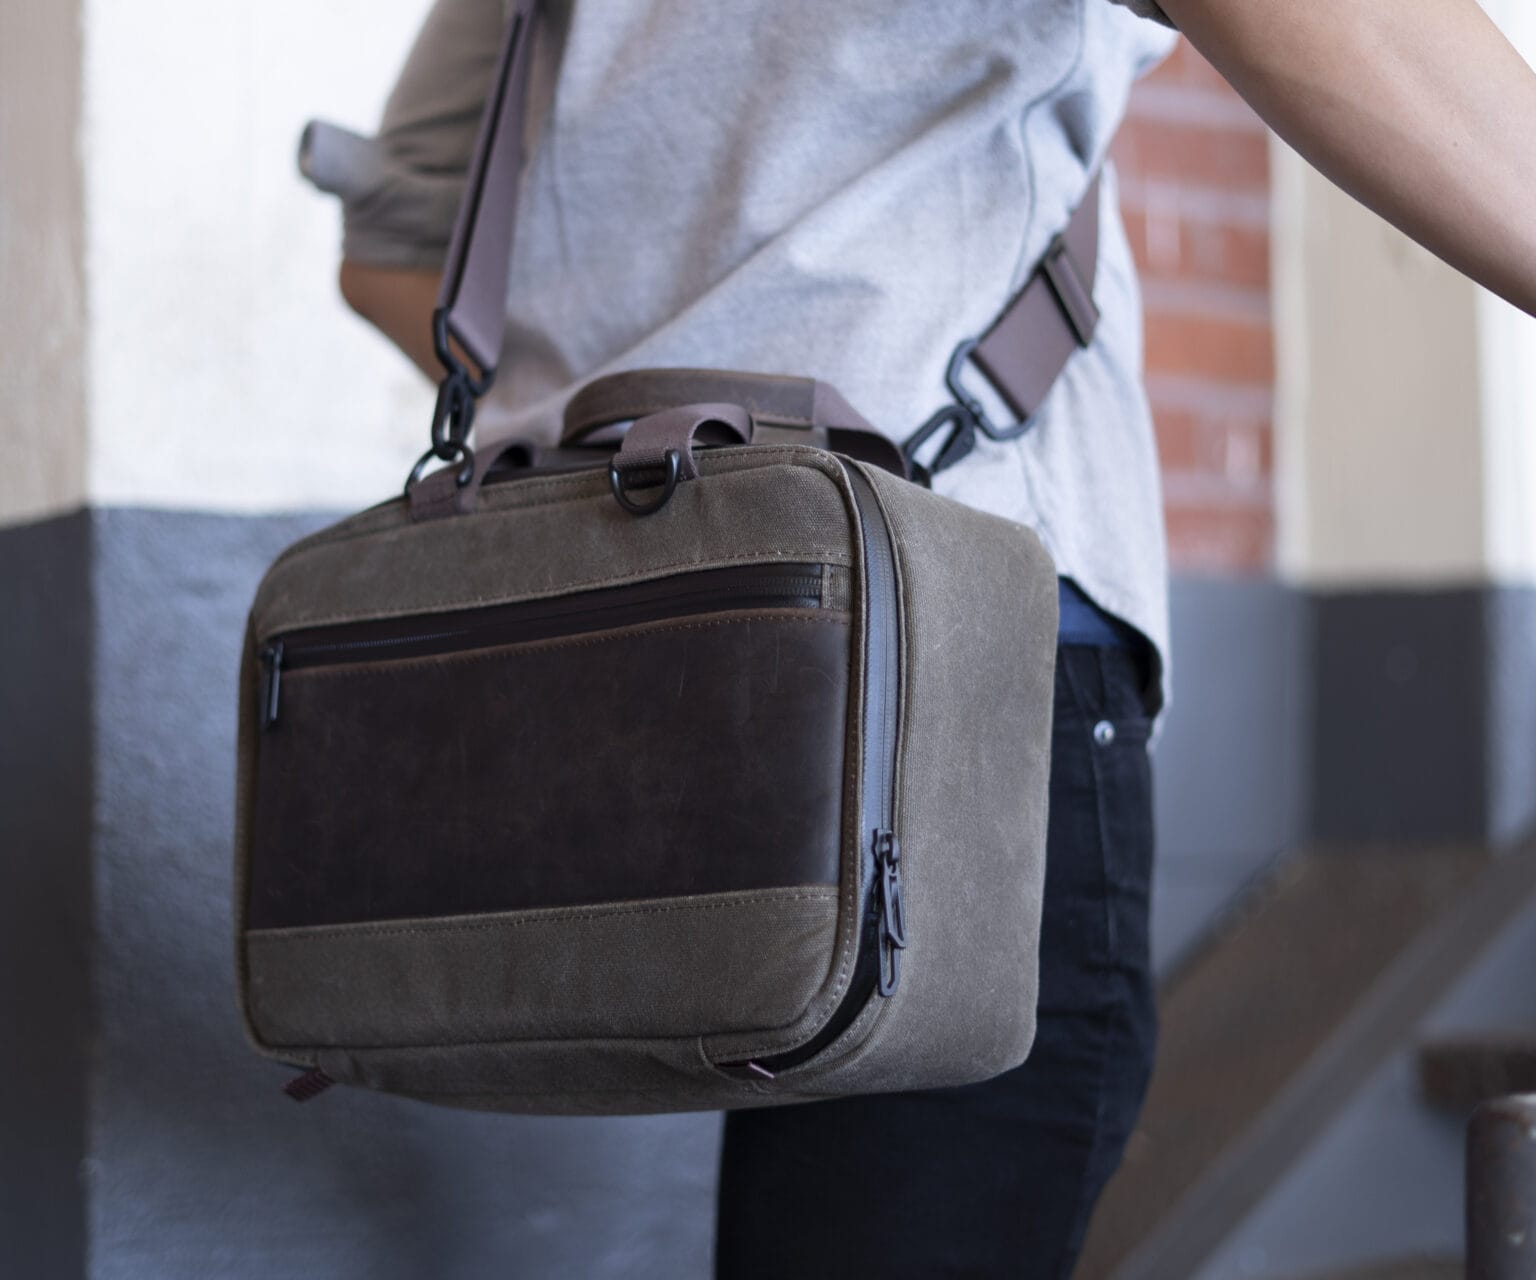 WaterField Designs' new travel bag for Mac Studio and accessories will get your gear there in style.